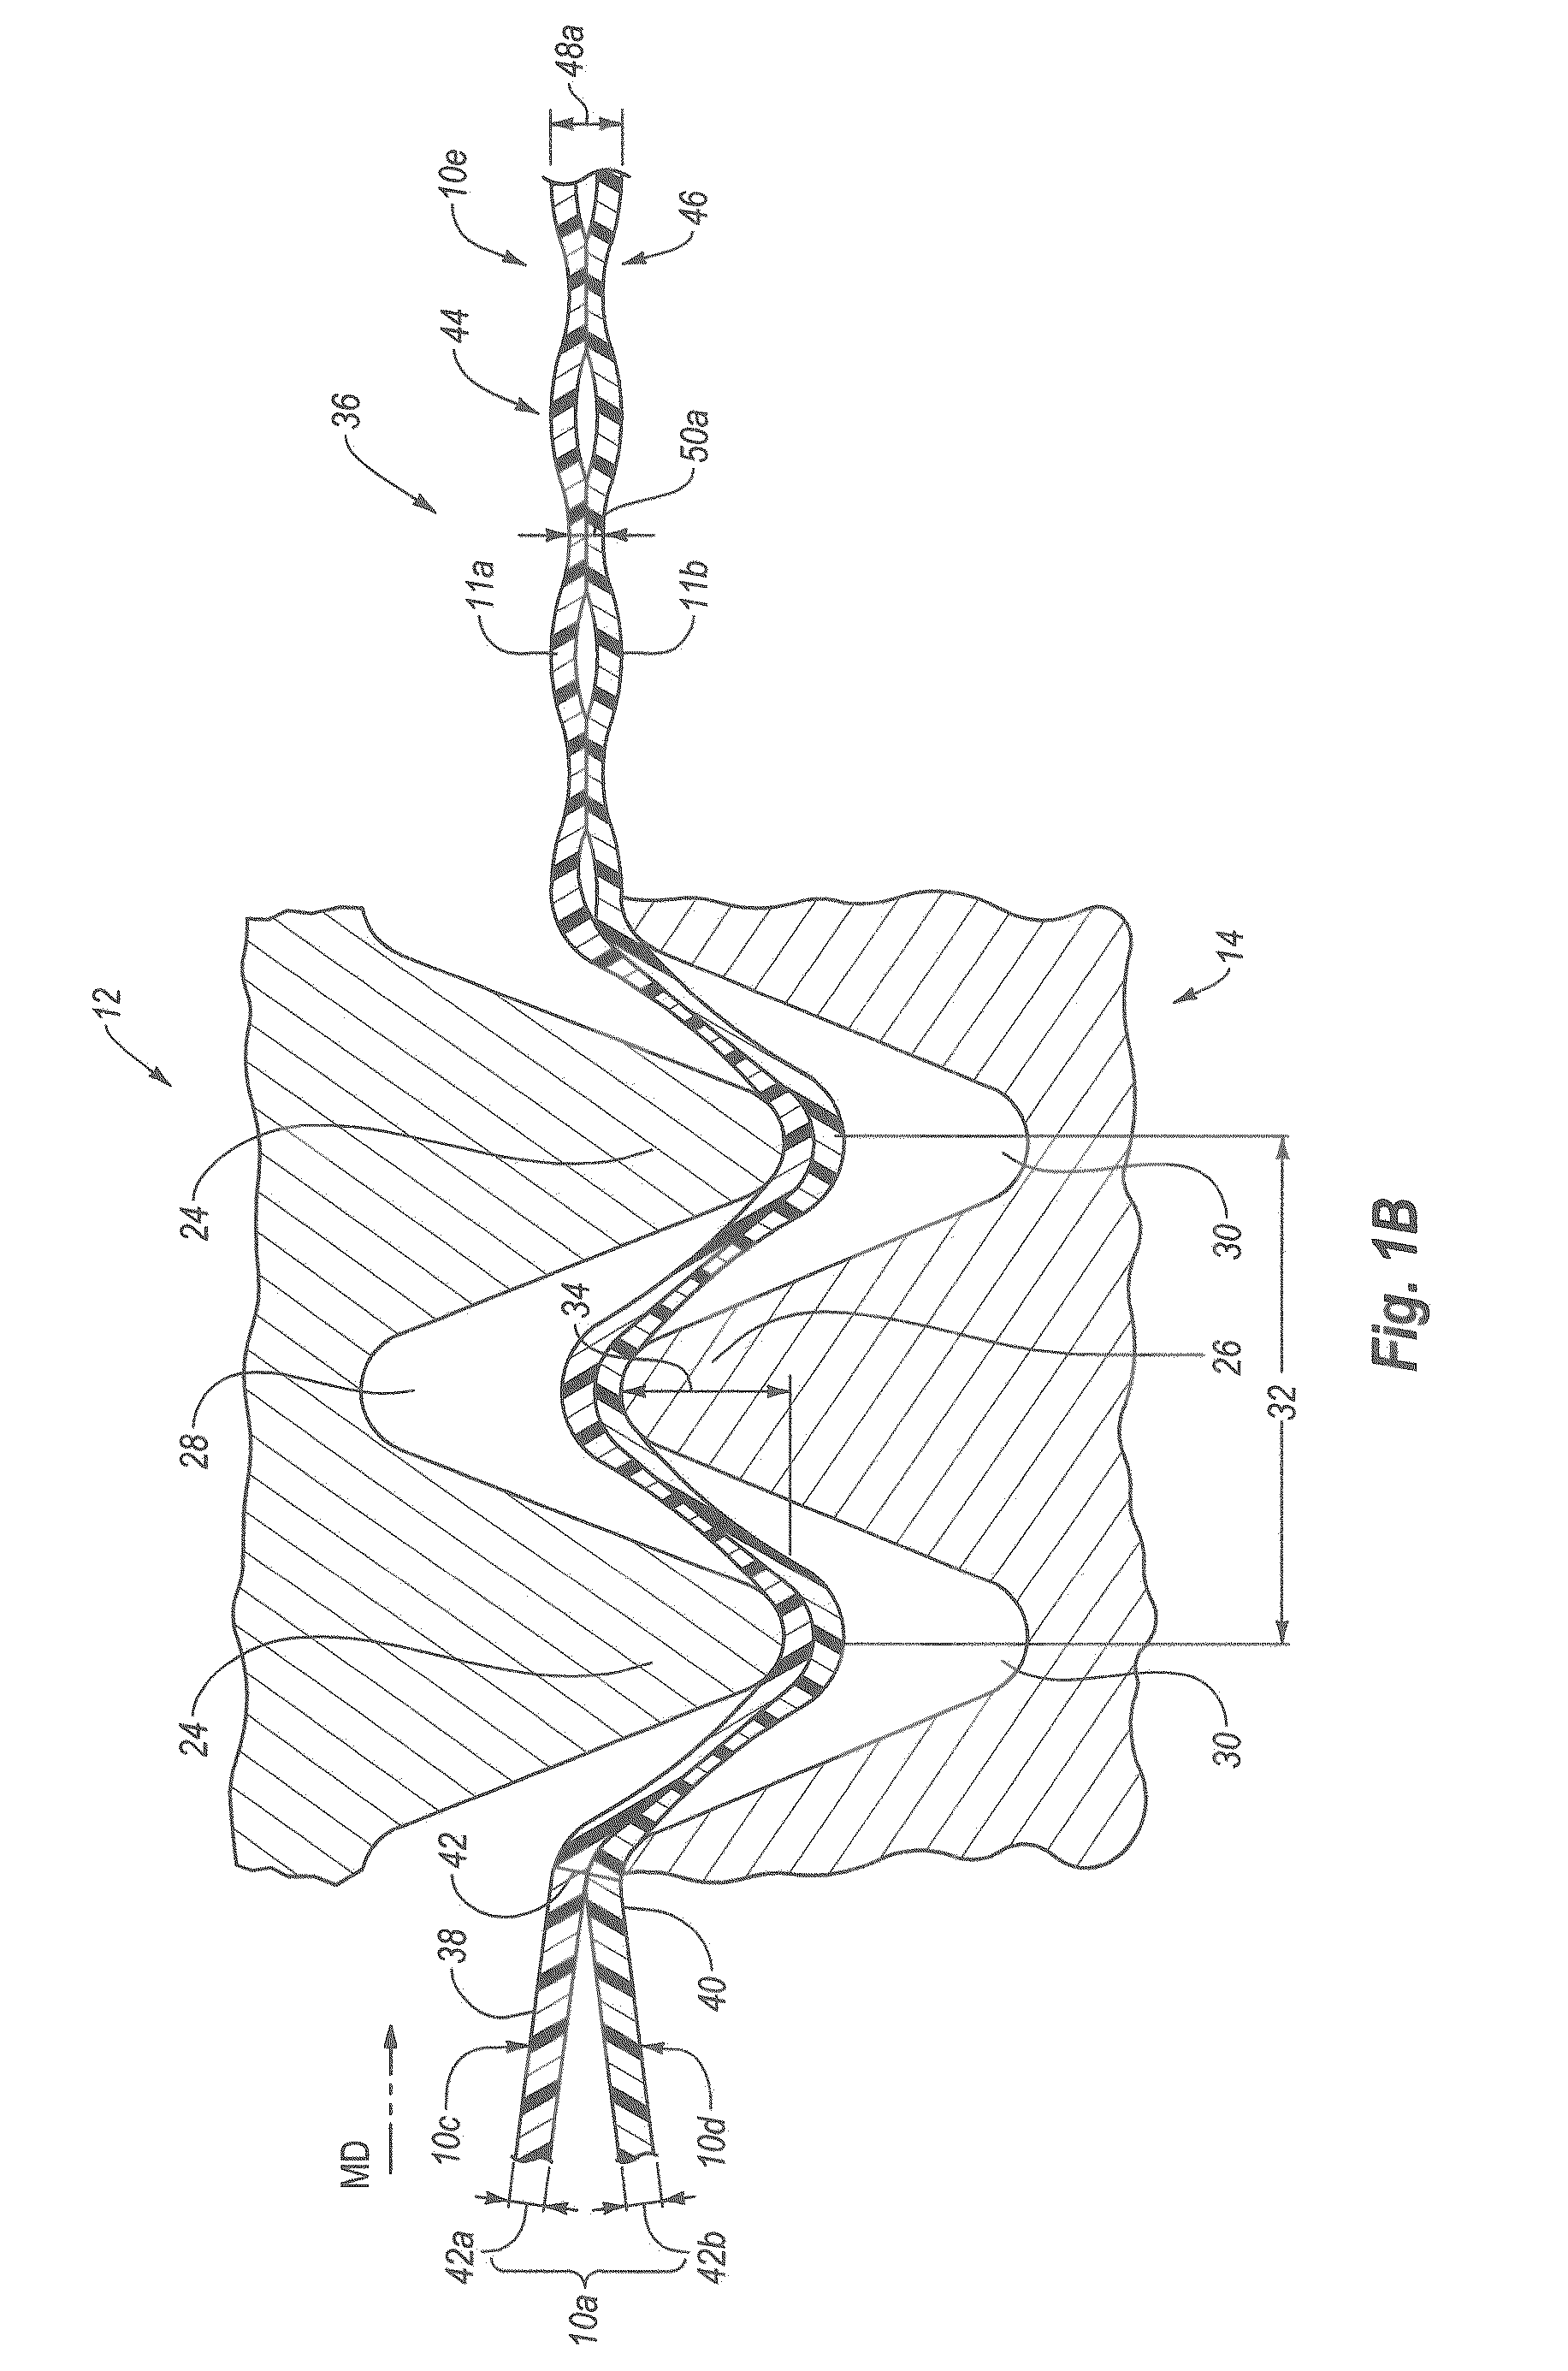 Multi-Layered Lightly-Laminated Films and Methods of Making The Same